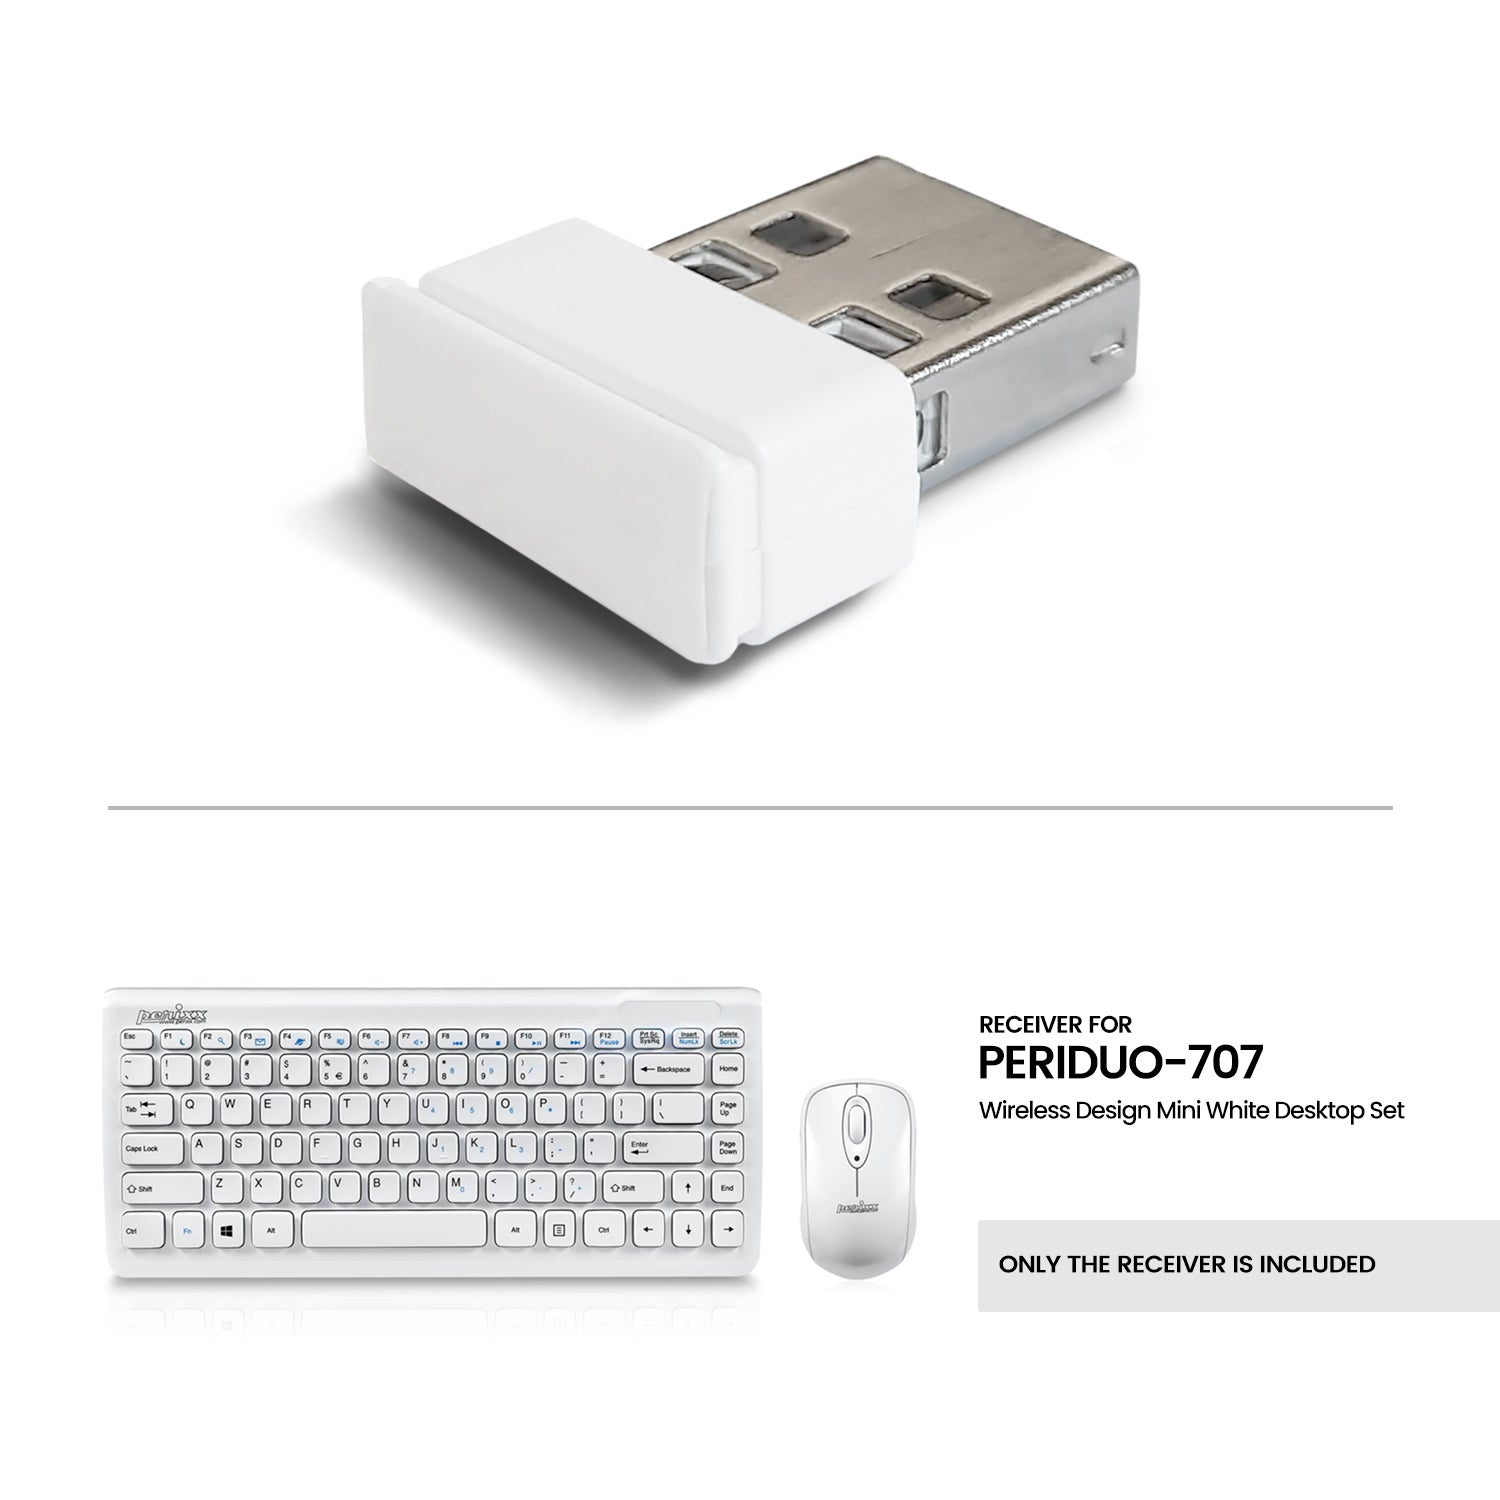 USB dongle receiver for PERIDUO-707-white - Perixx Europe